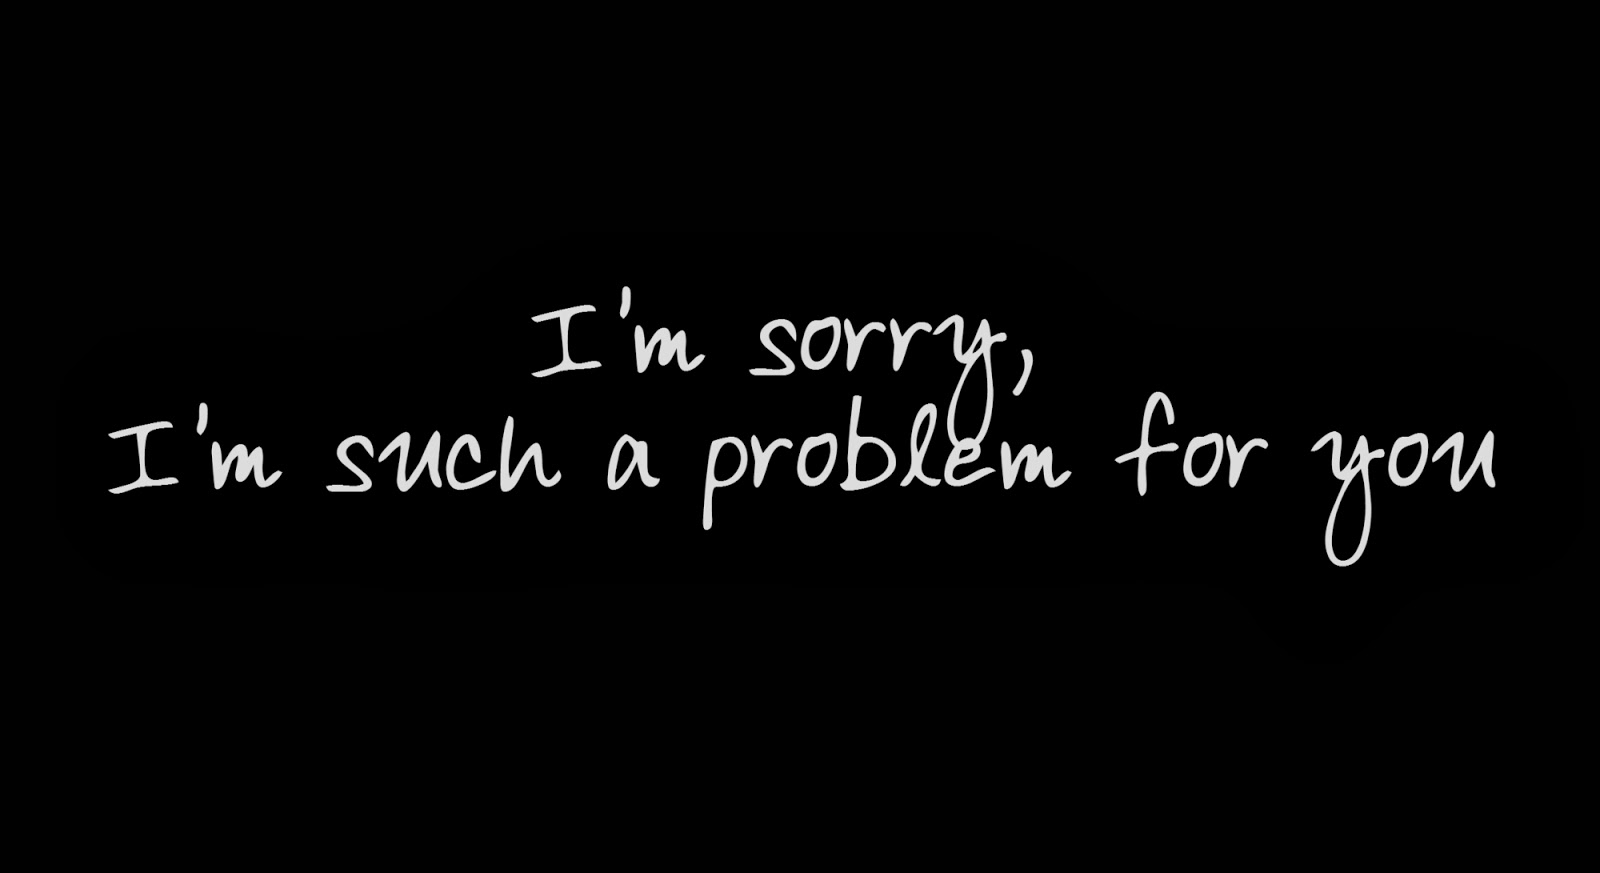 I'm sorry, I'm such a problem for you